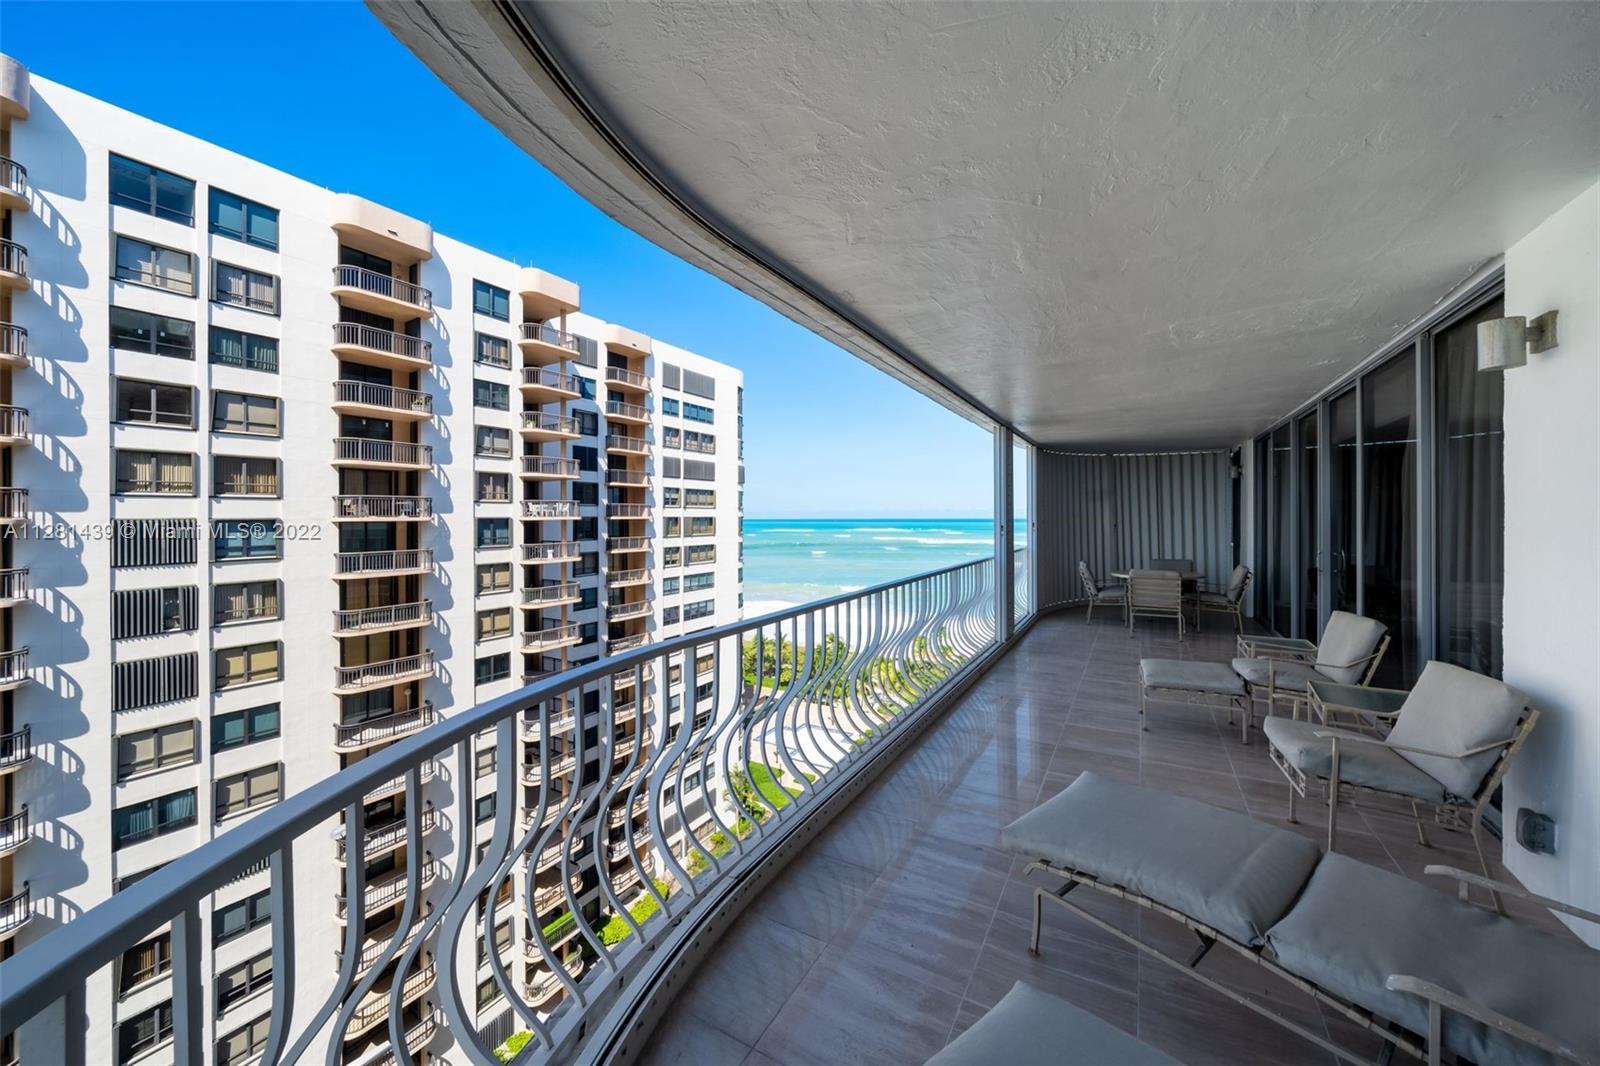 Great opportunity to own in the sought-after Bal Harbour 101 building. This spacious residence is cu